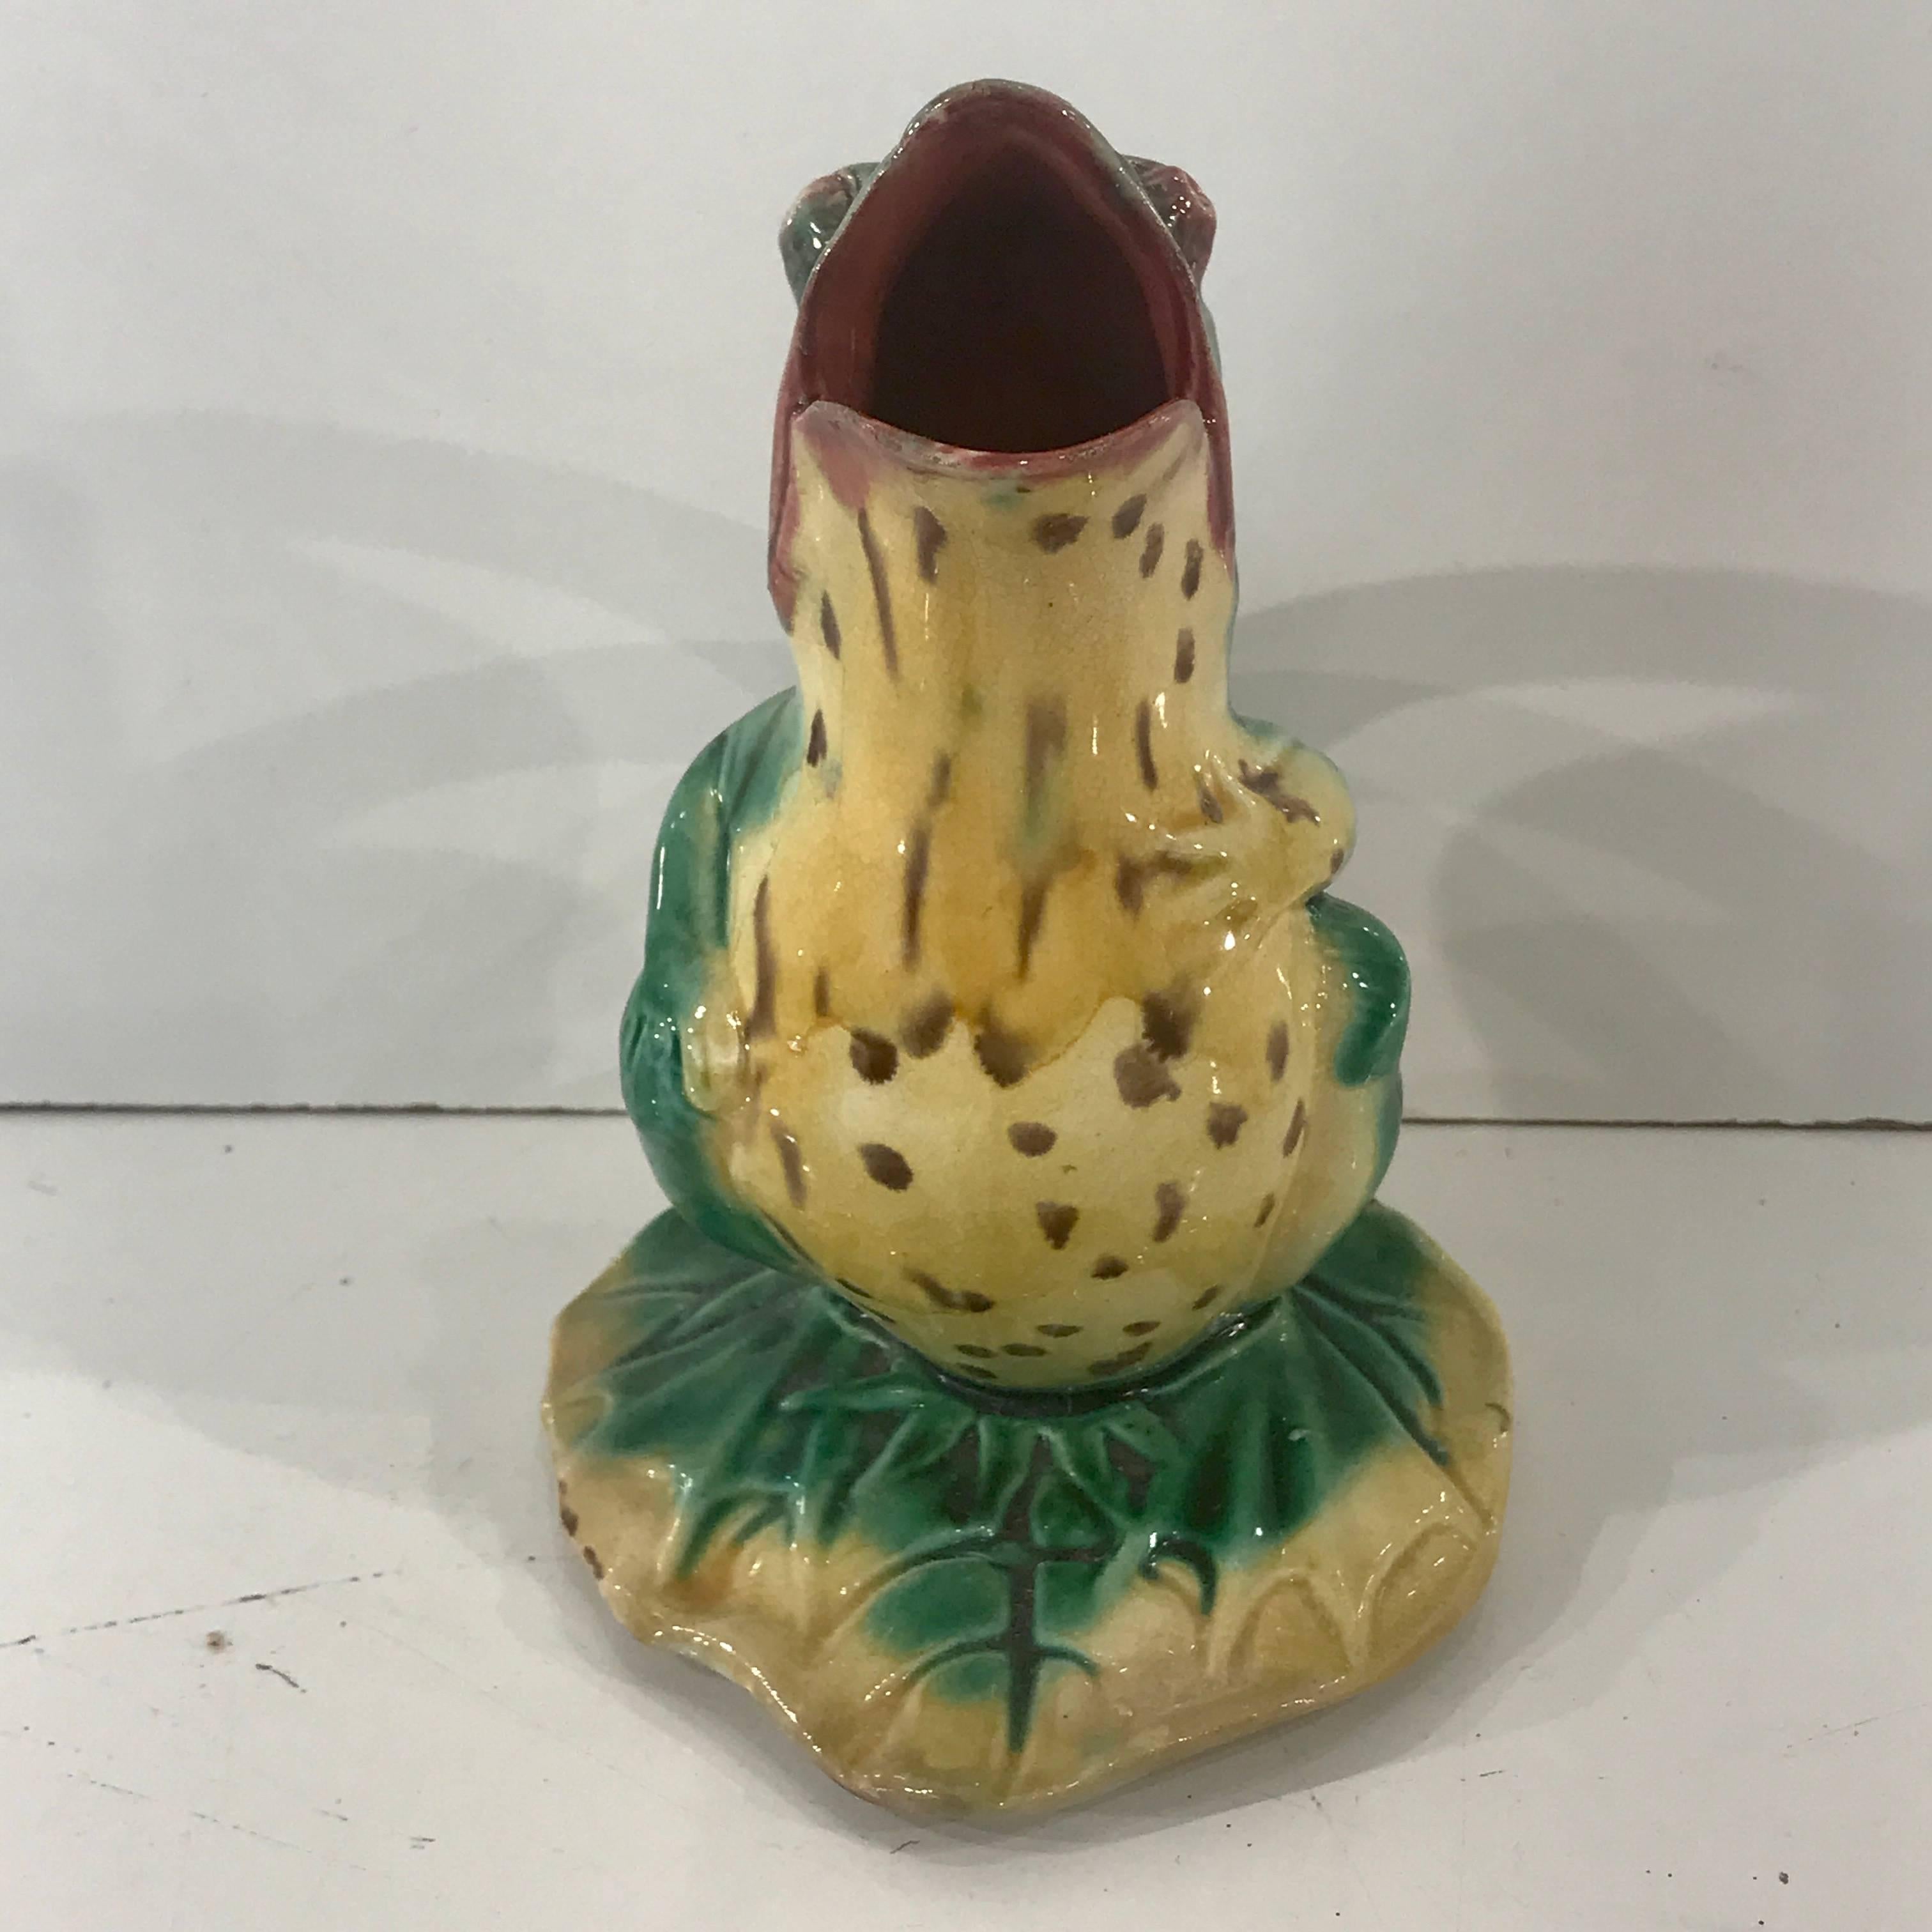 19th century English Majolica frog pitcher by Edward Steele, excellent color palate and condition
This item is presently located at our Palm Beach Location.